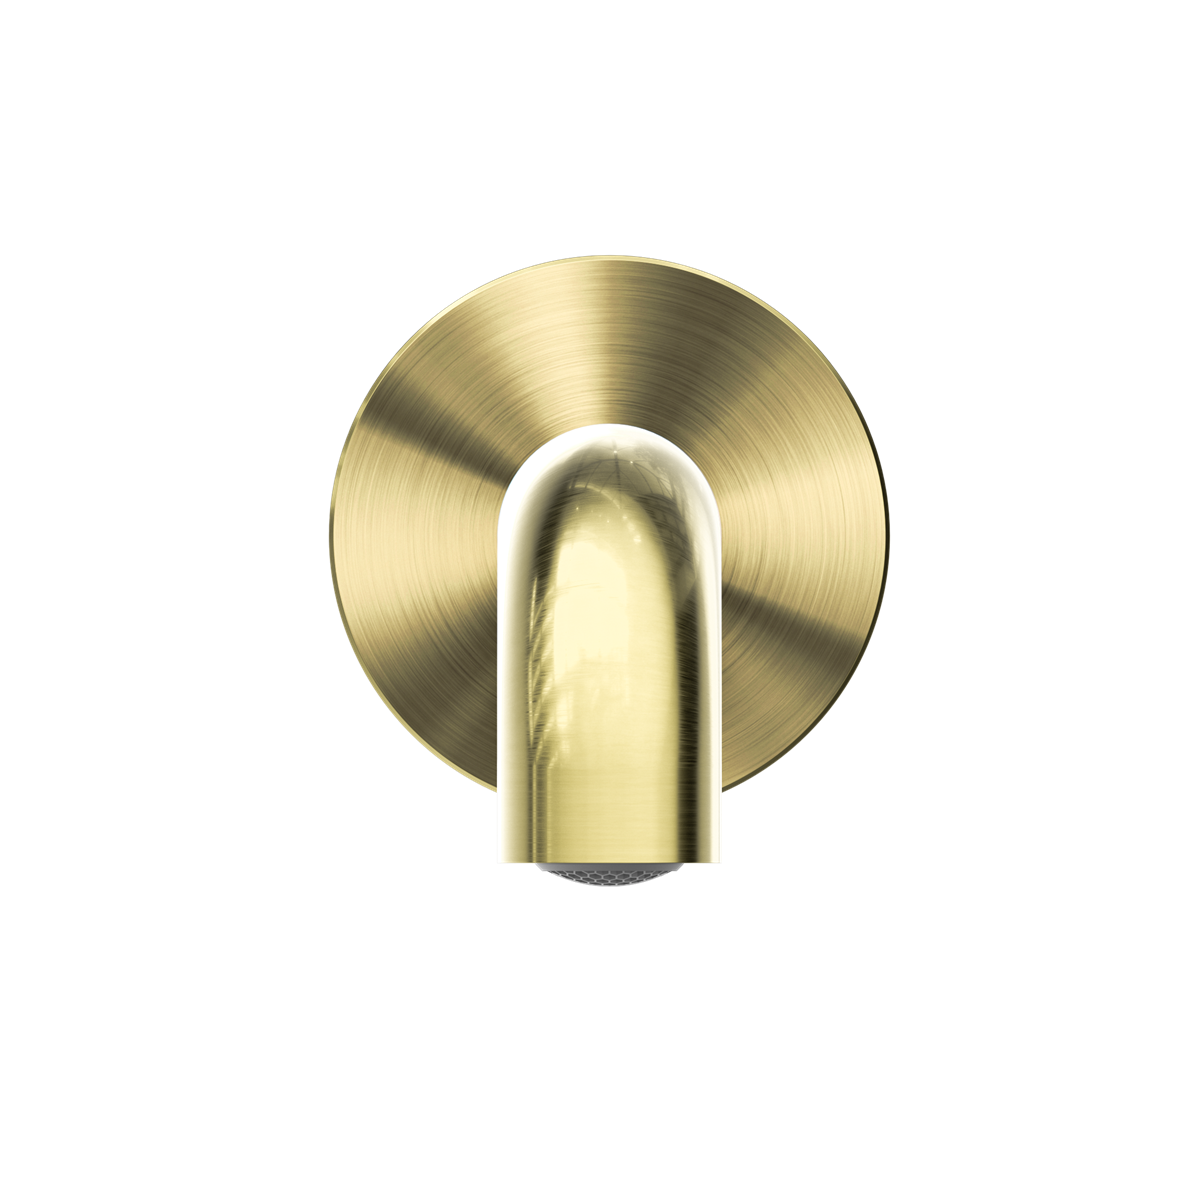 NERO MECCA BASIN/ BATH SPOUT BRUSHED GOLD (AVAILABLE IN 120MM,160MM,185MM, 230MM AND 260MM)